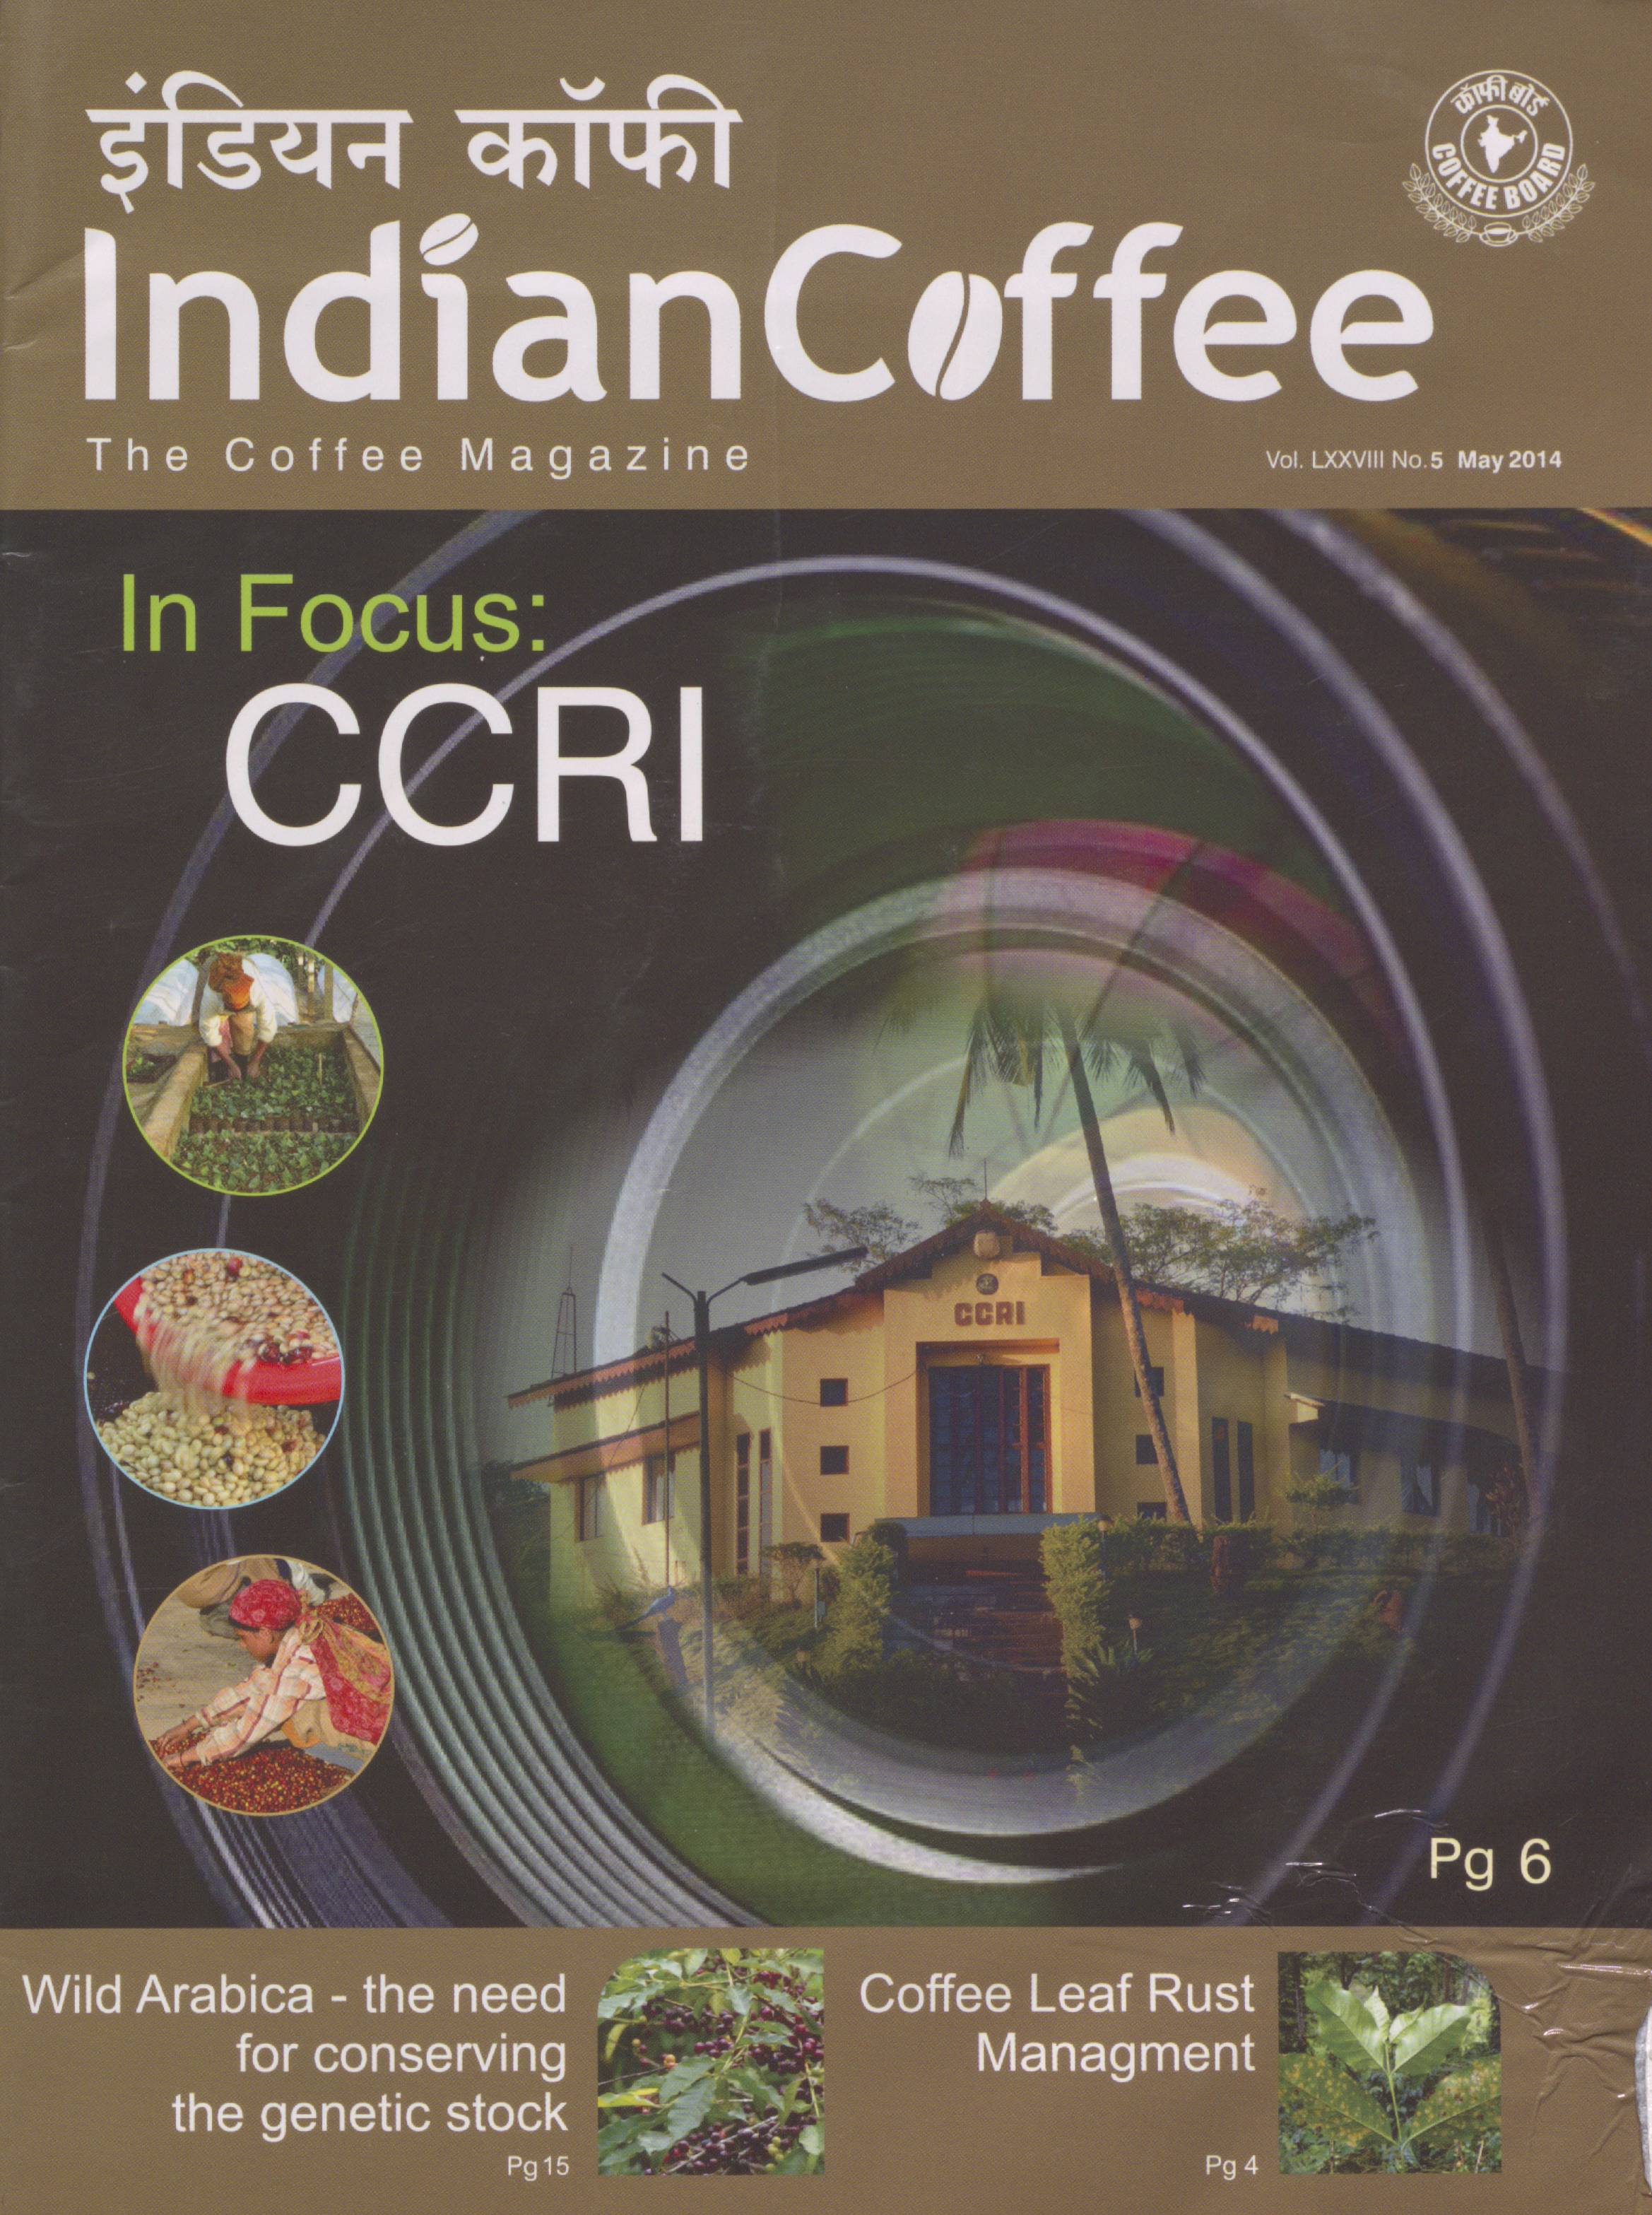 Indian Coffee - The Coffee Magazine- In Focus:CCRI (Contains tribute to Coleman)